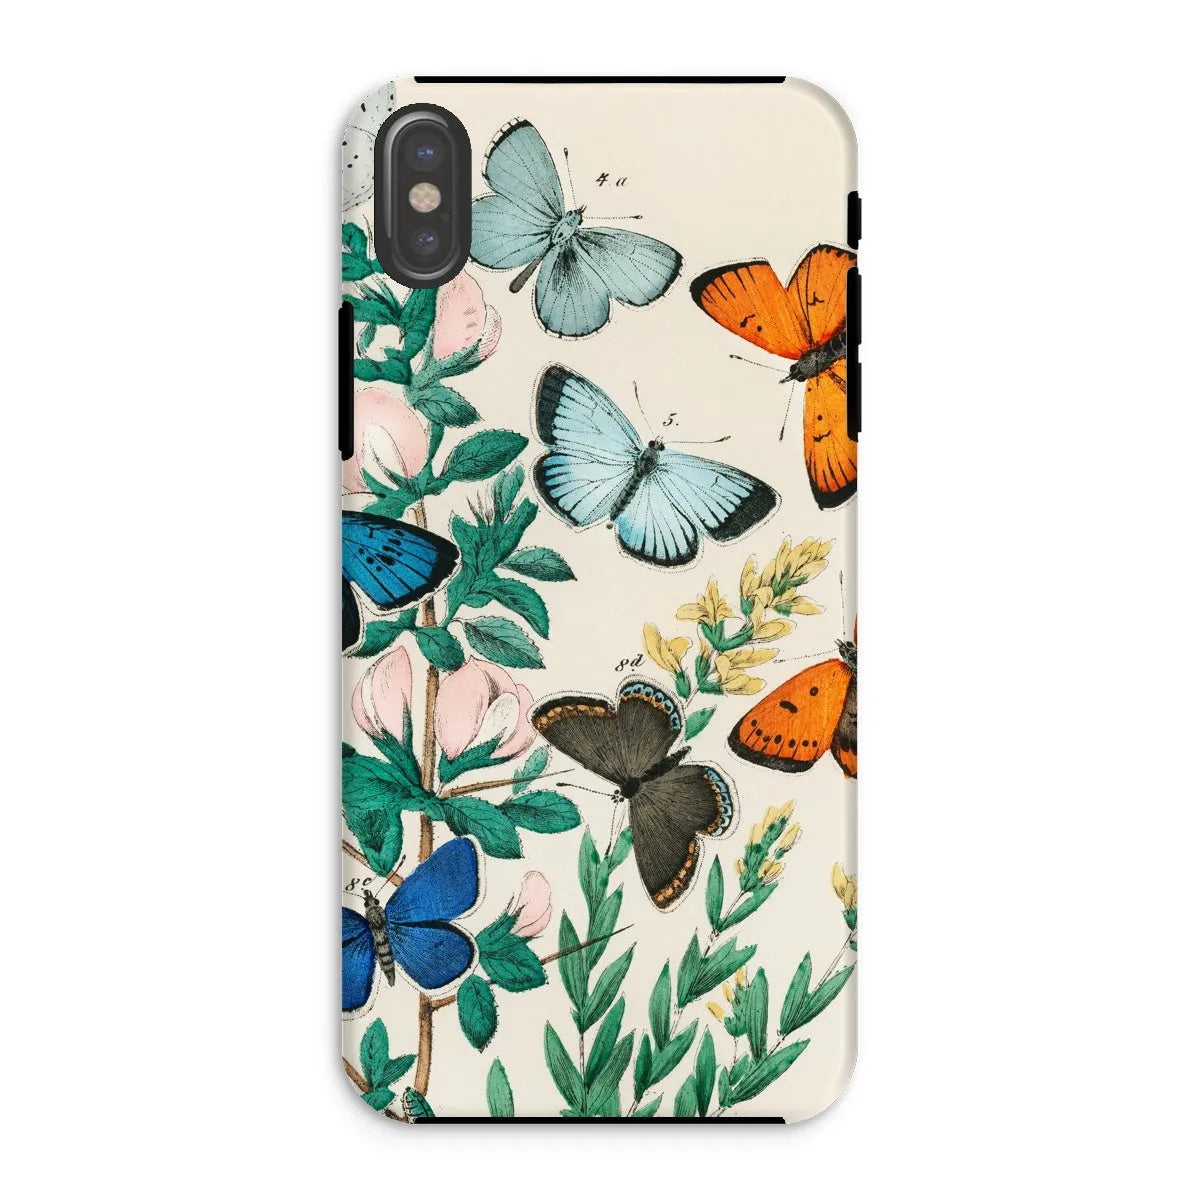 Another Butterfly Aesthetic Art Phone Case - William Forsell Kirby - Iphone Xs / Matte - Mobile Phone Cases - Aesthetic